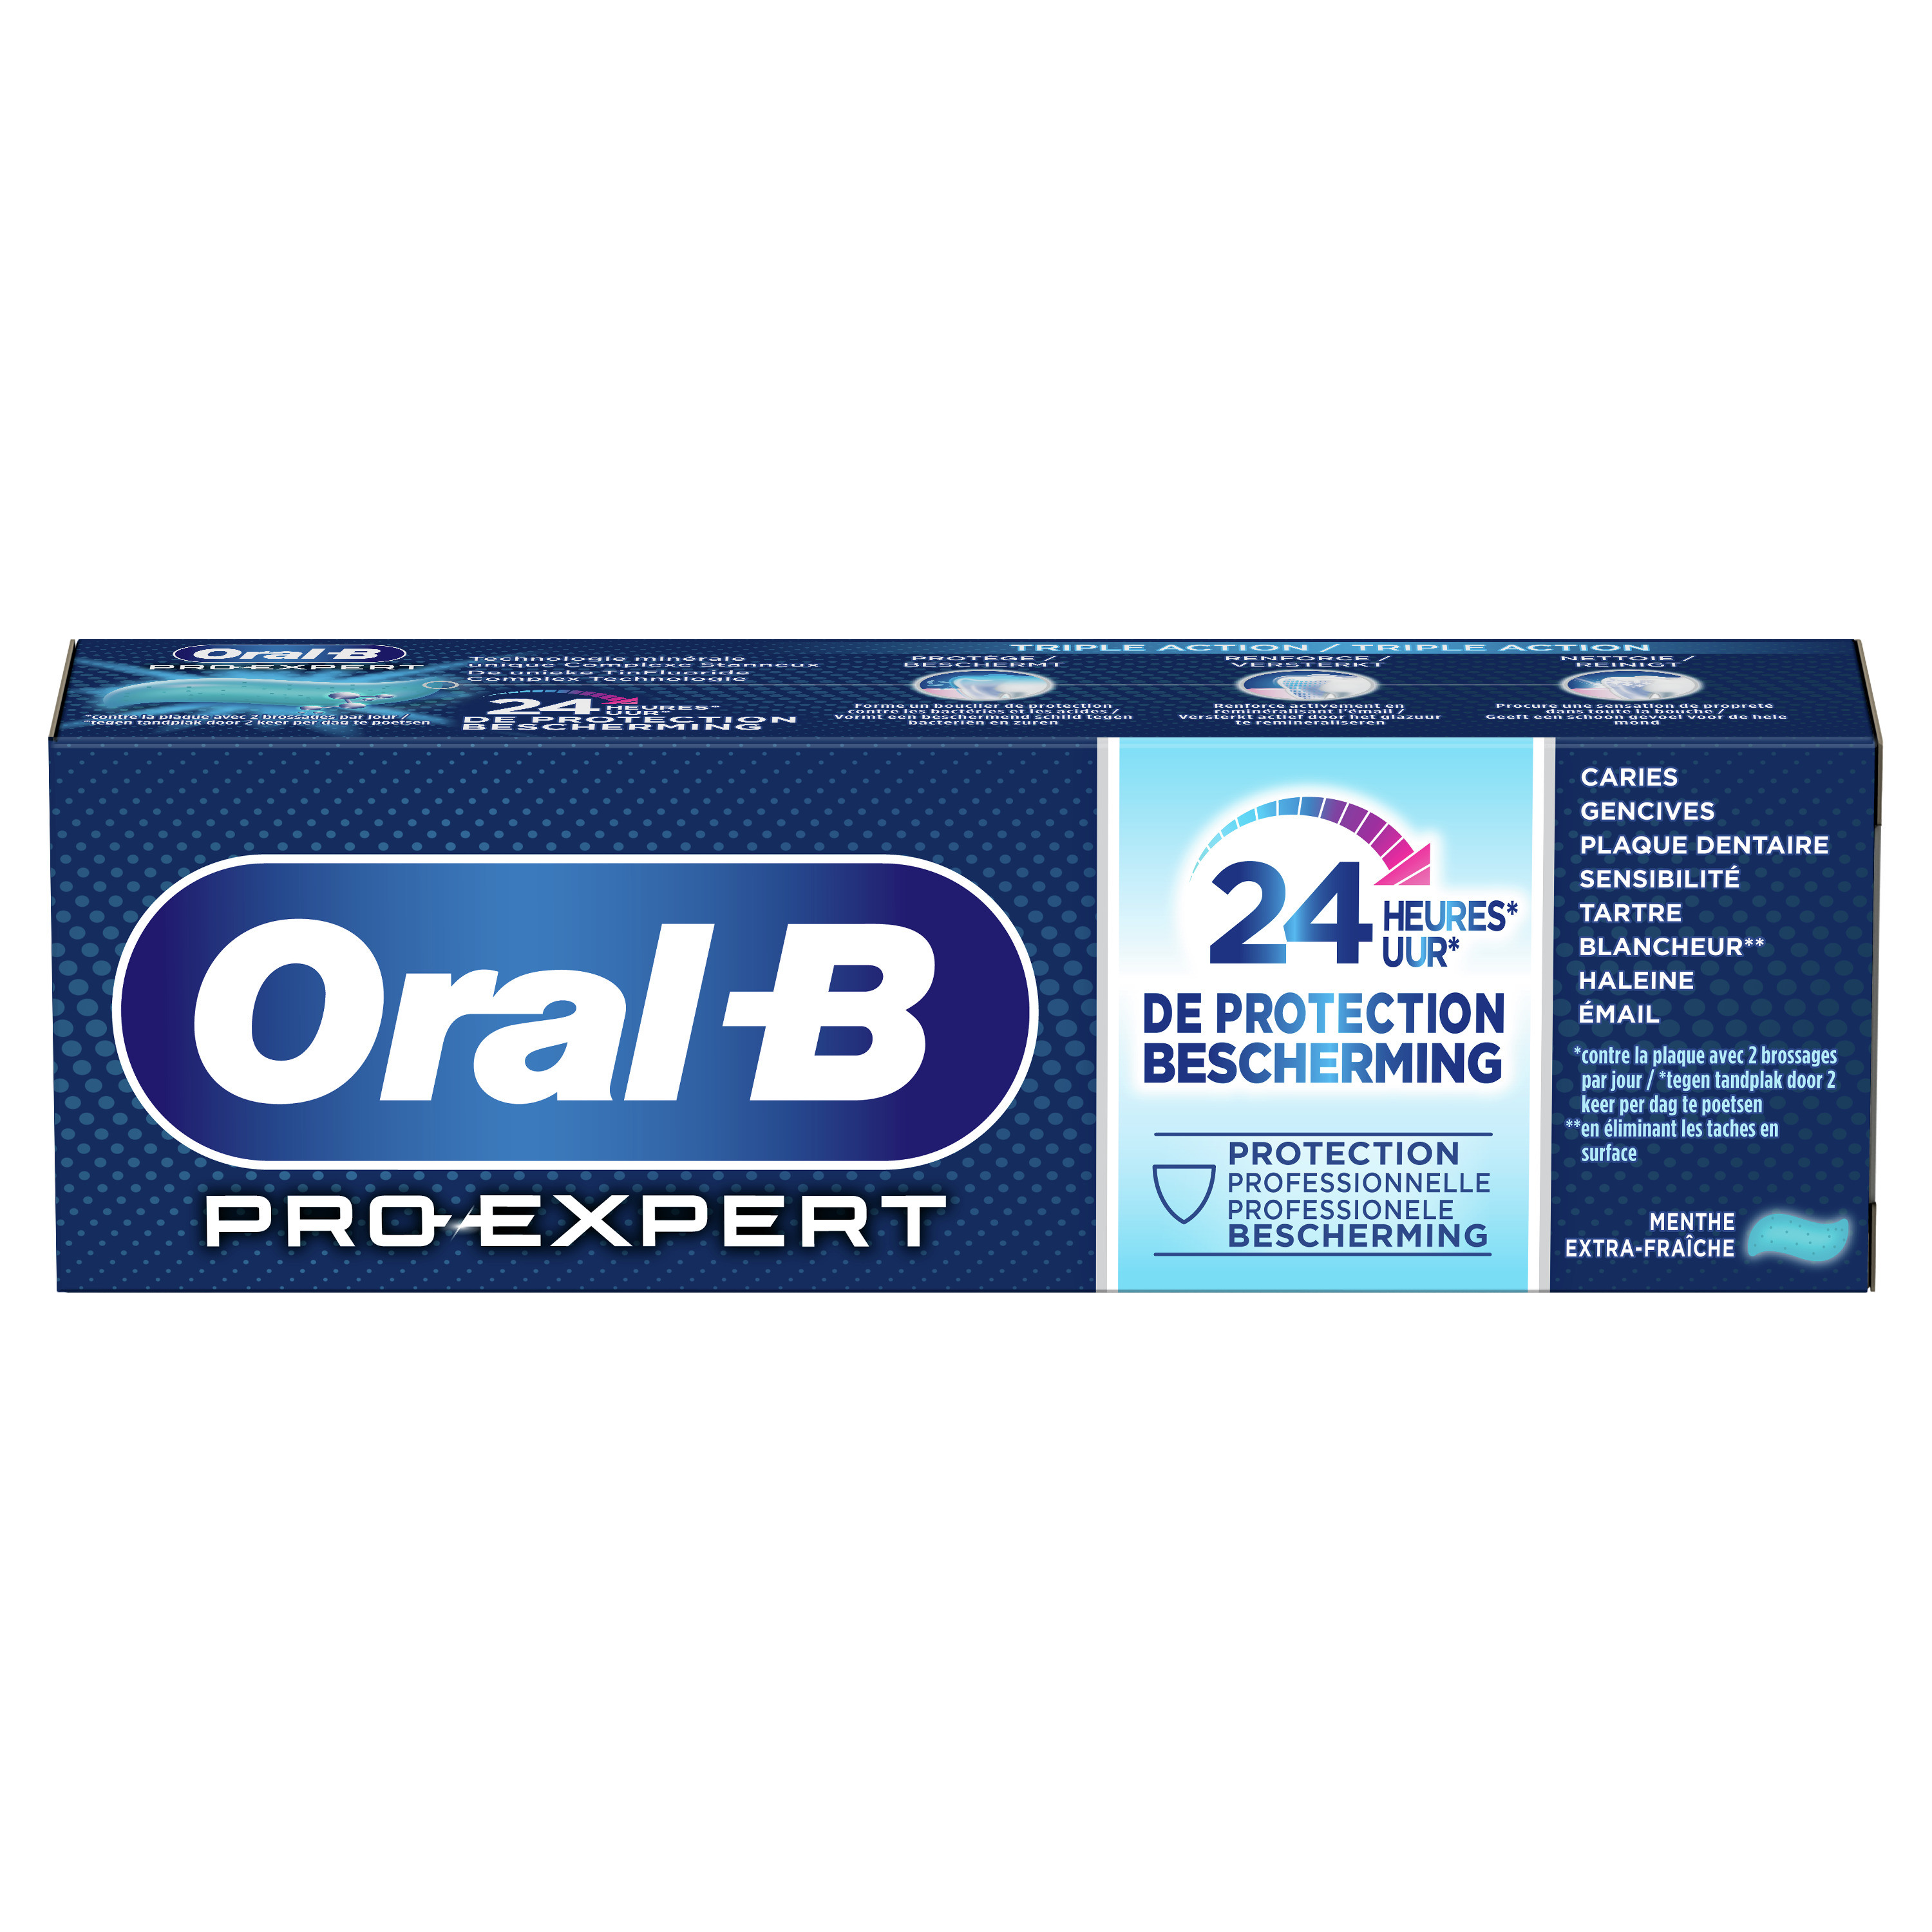 Oral-B Pro-Expert Protection Professionnelle Dentifrice undefined